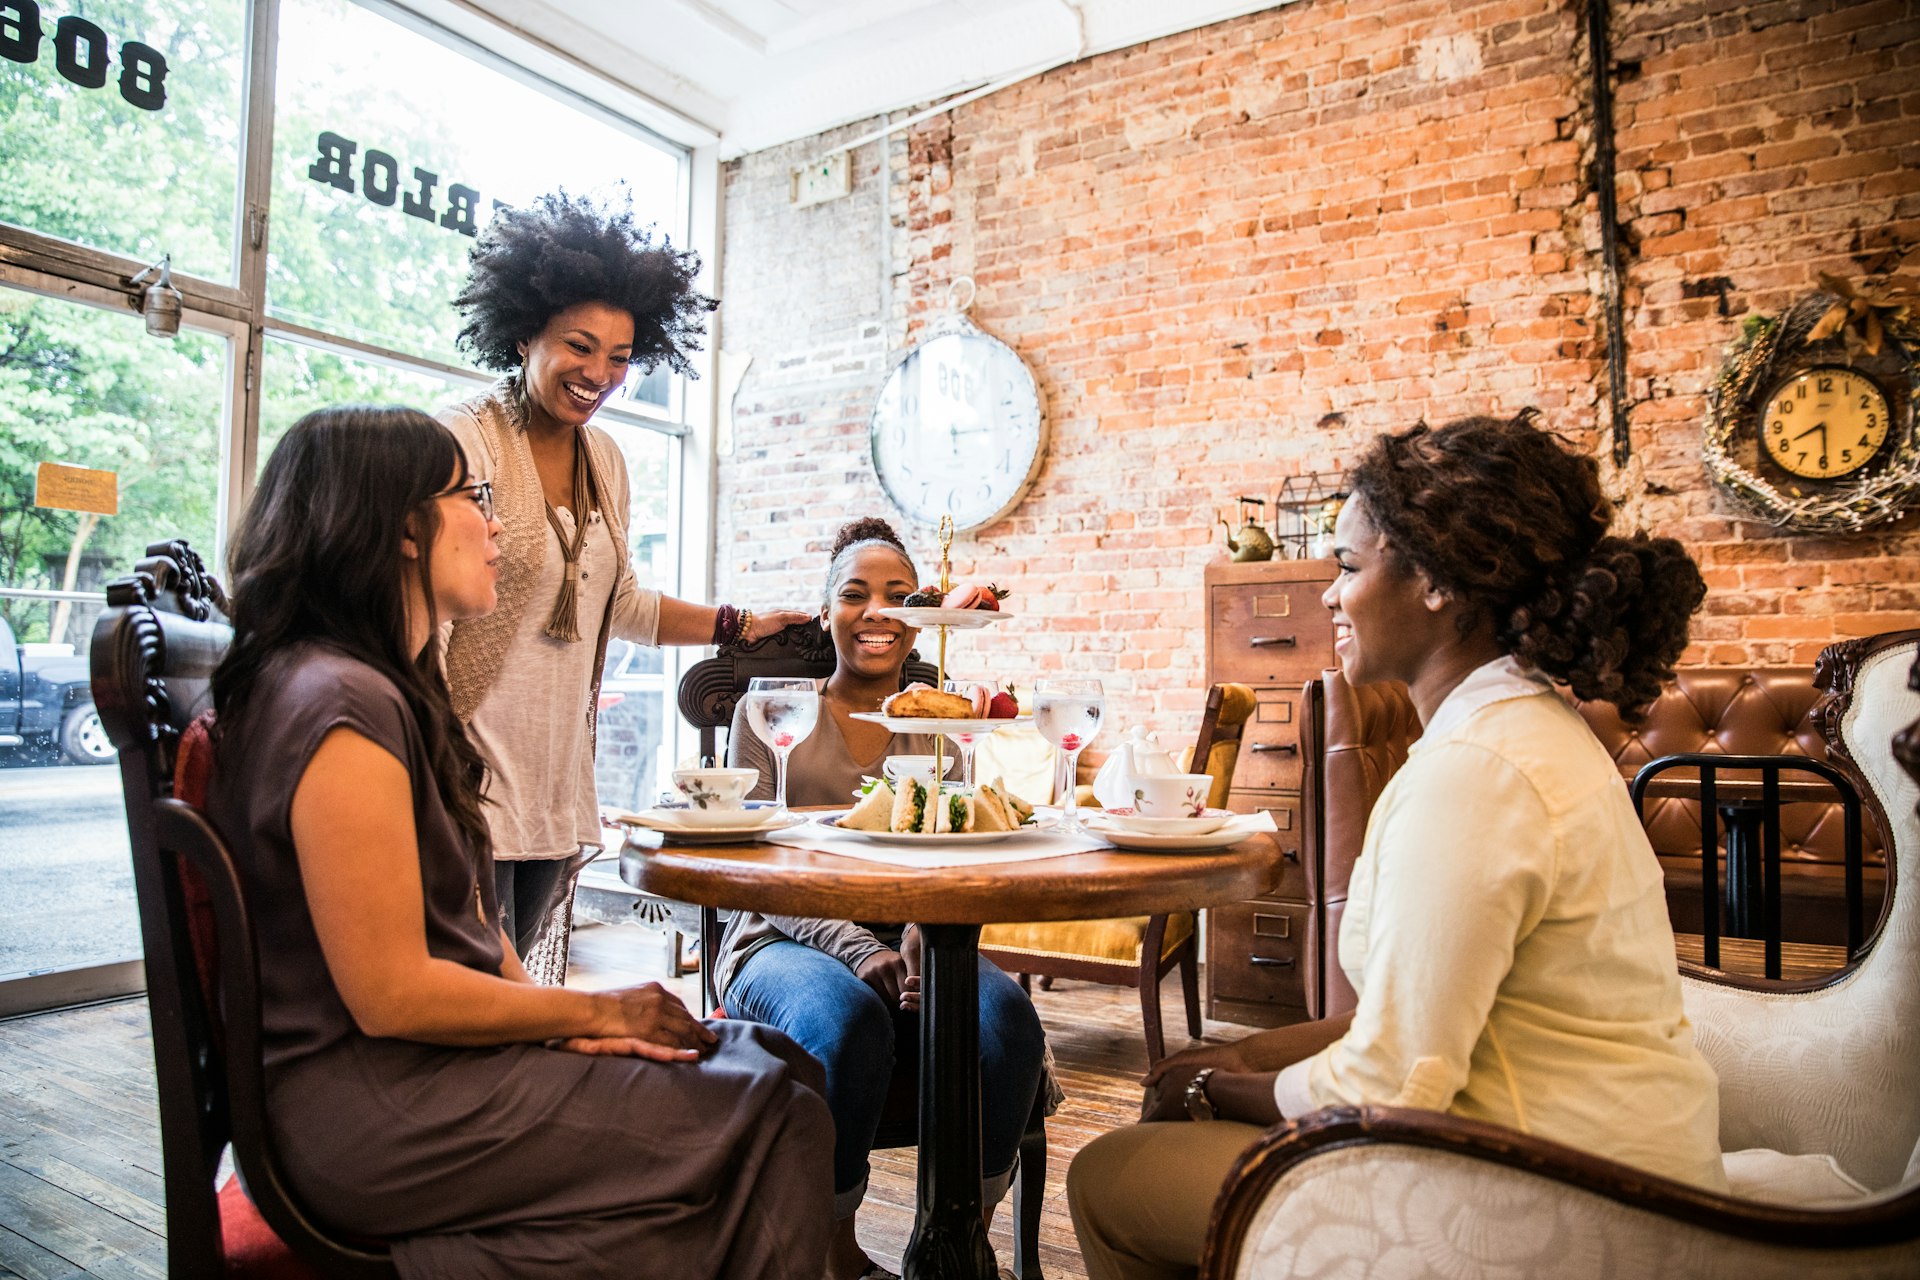 Three women are sitting around a table in a tea parlor, while another woman stands next to the table, talking to them